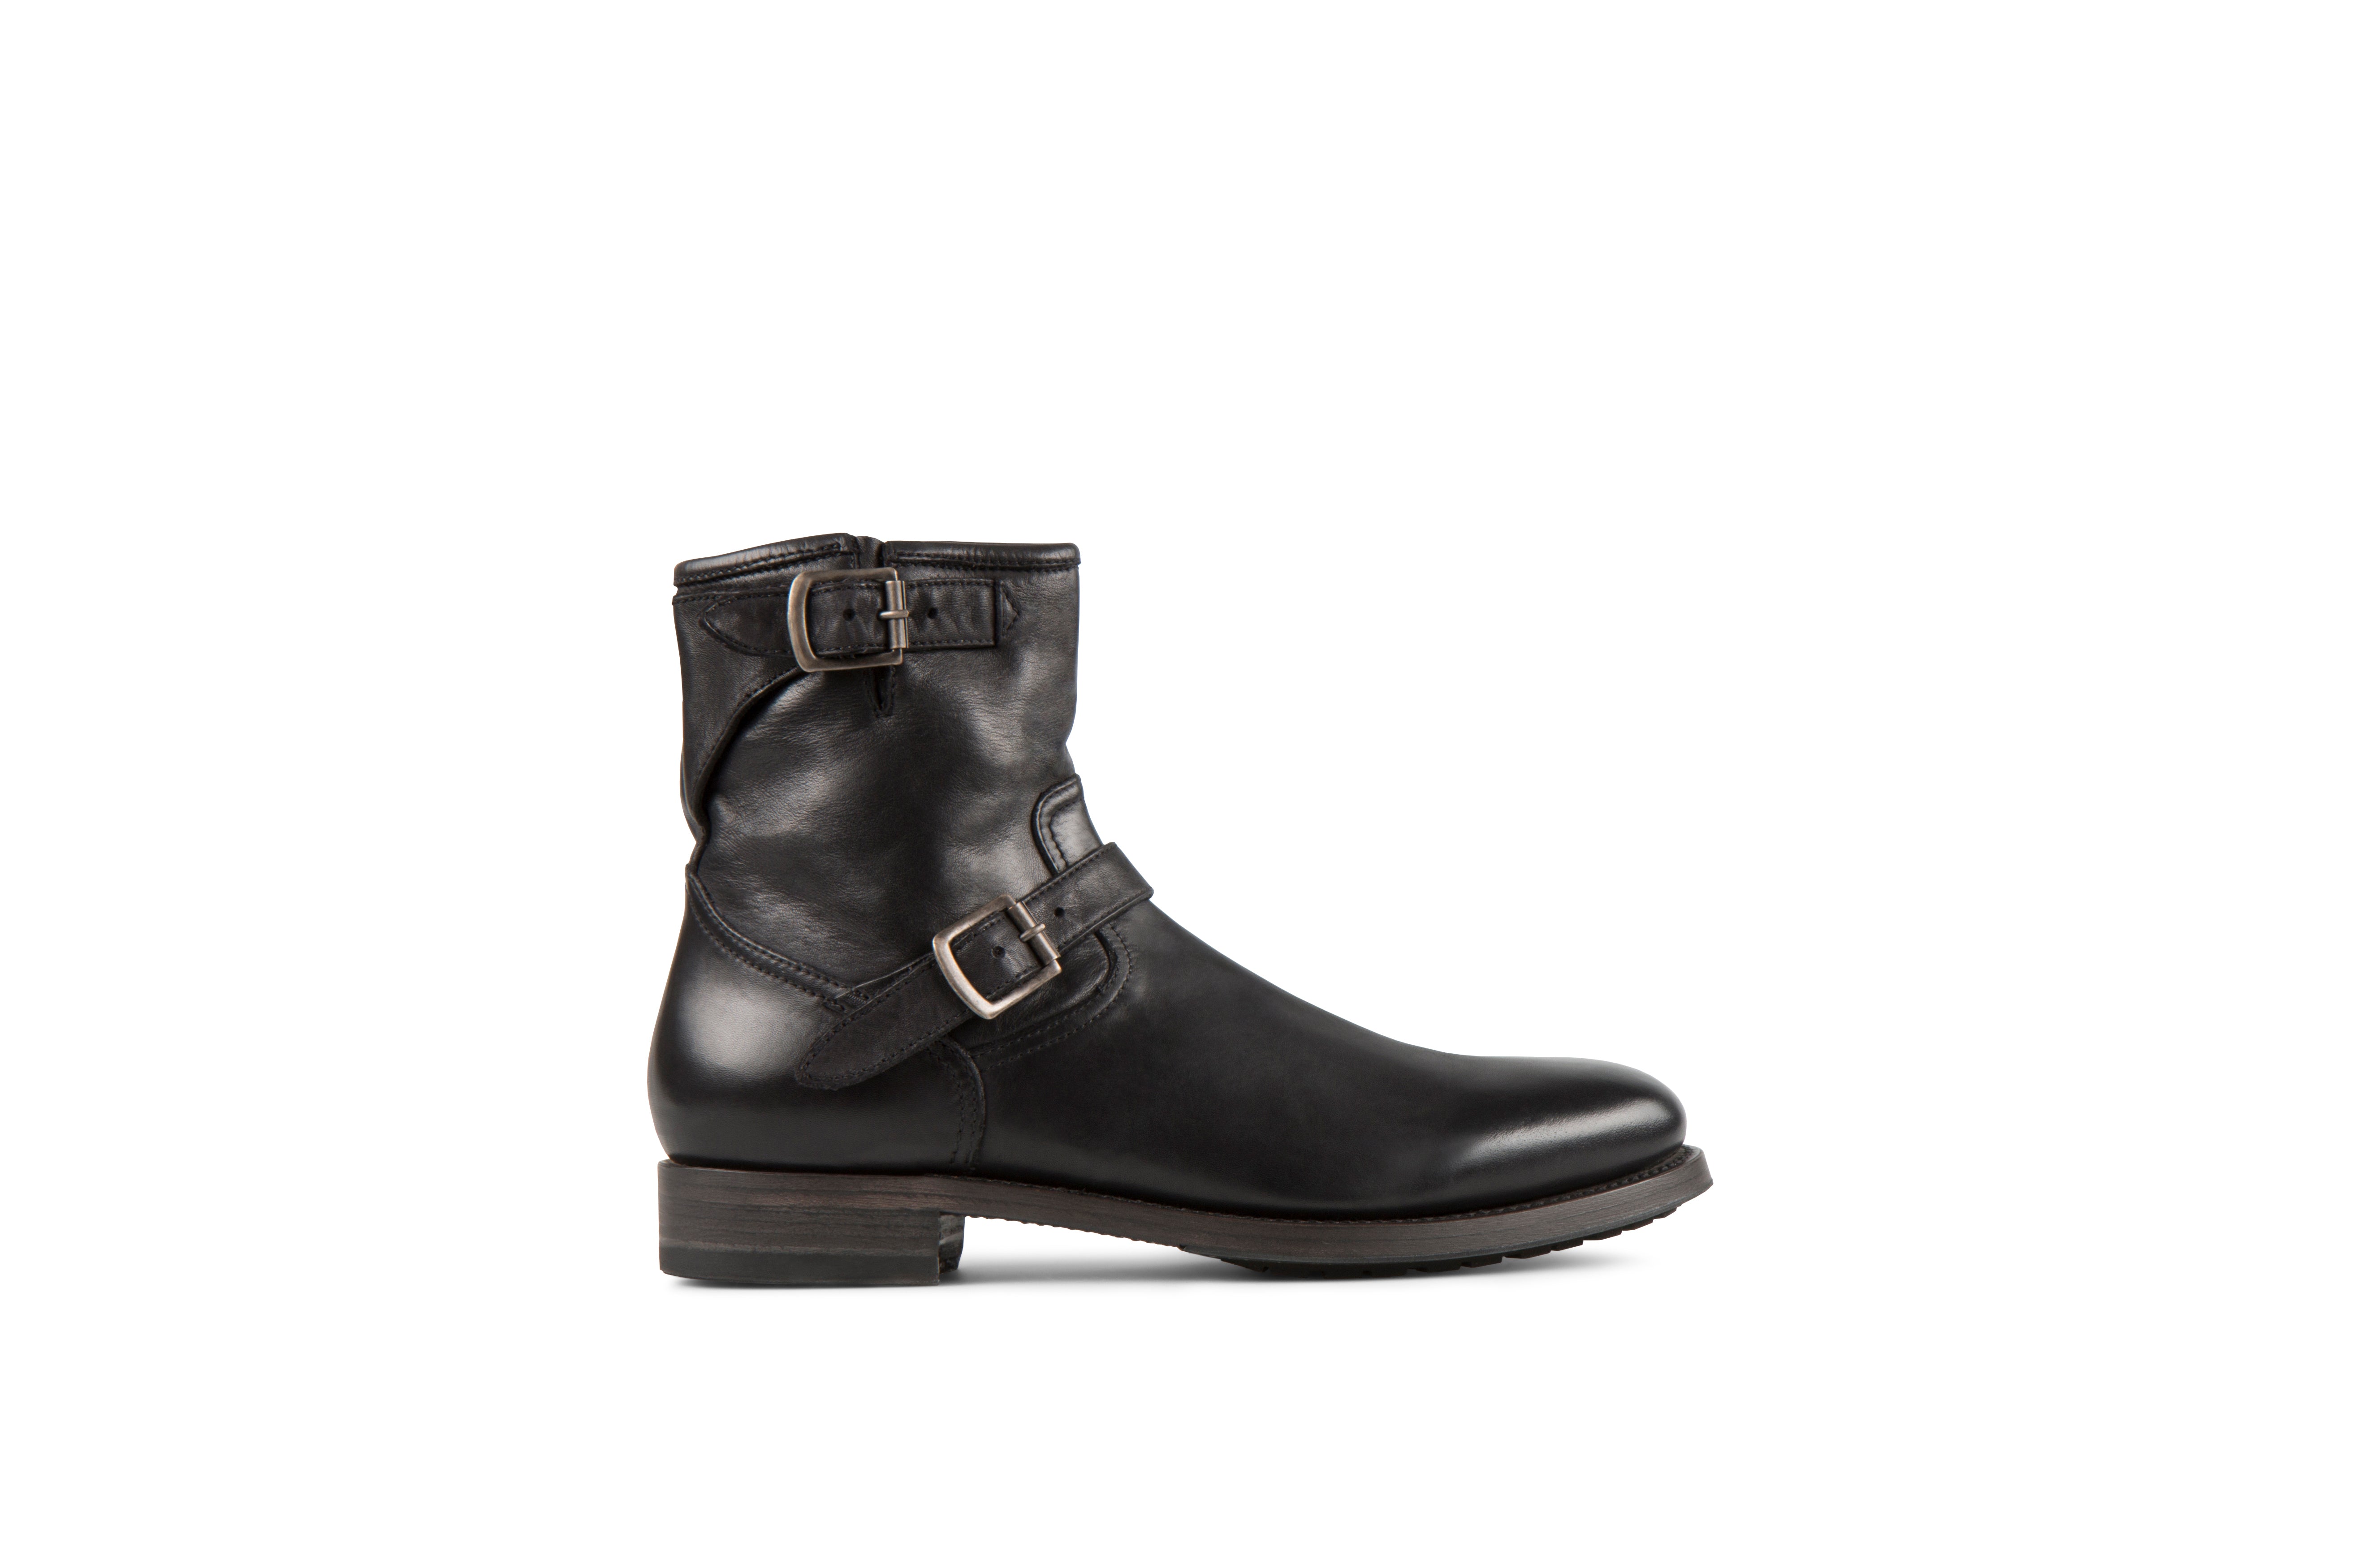 Lowrider Black Washed Calf Leather Rock Boots